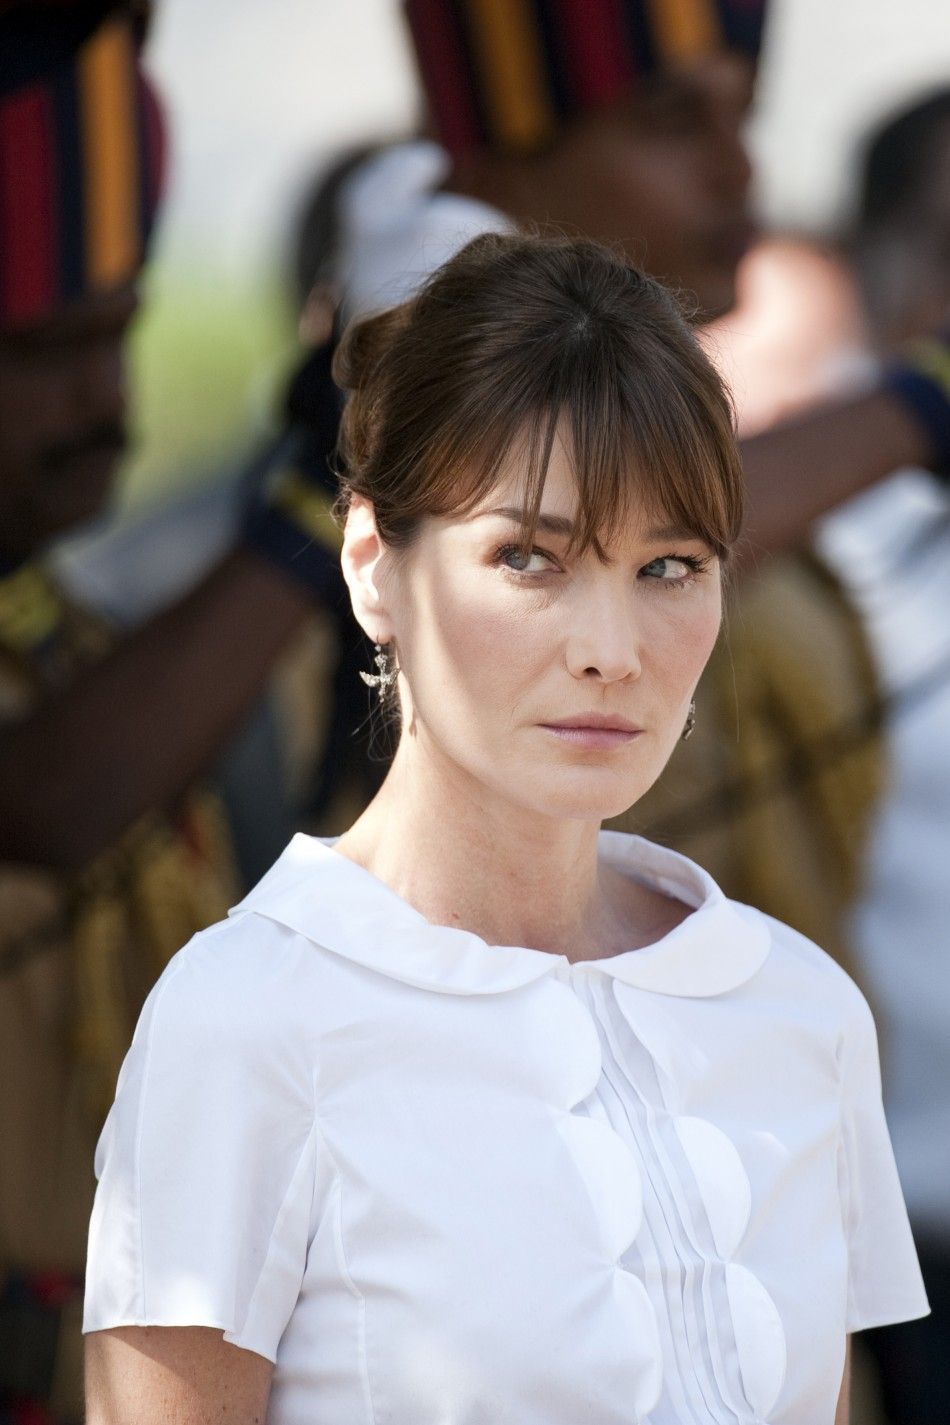 French first lady Carla Bruni-Sarkozy attends a ceremony at the Gymkhana police memorial commemorating the November 2008 terror attacks in Mumbai